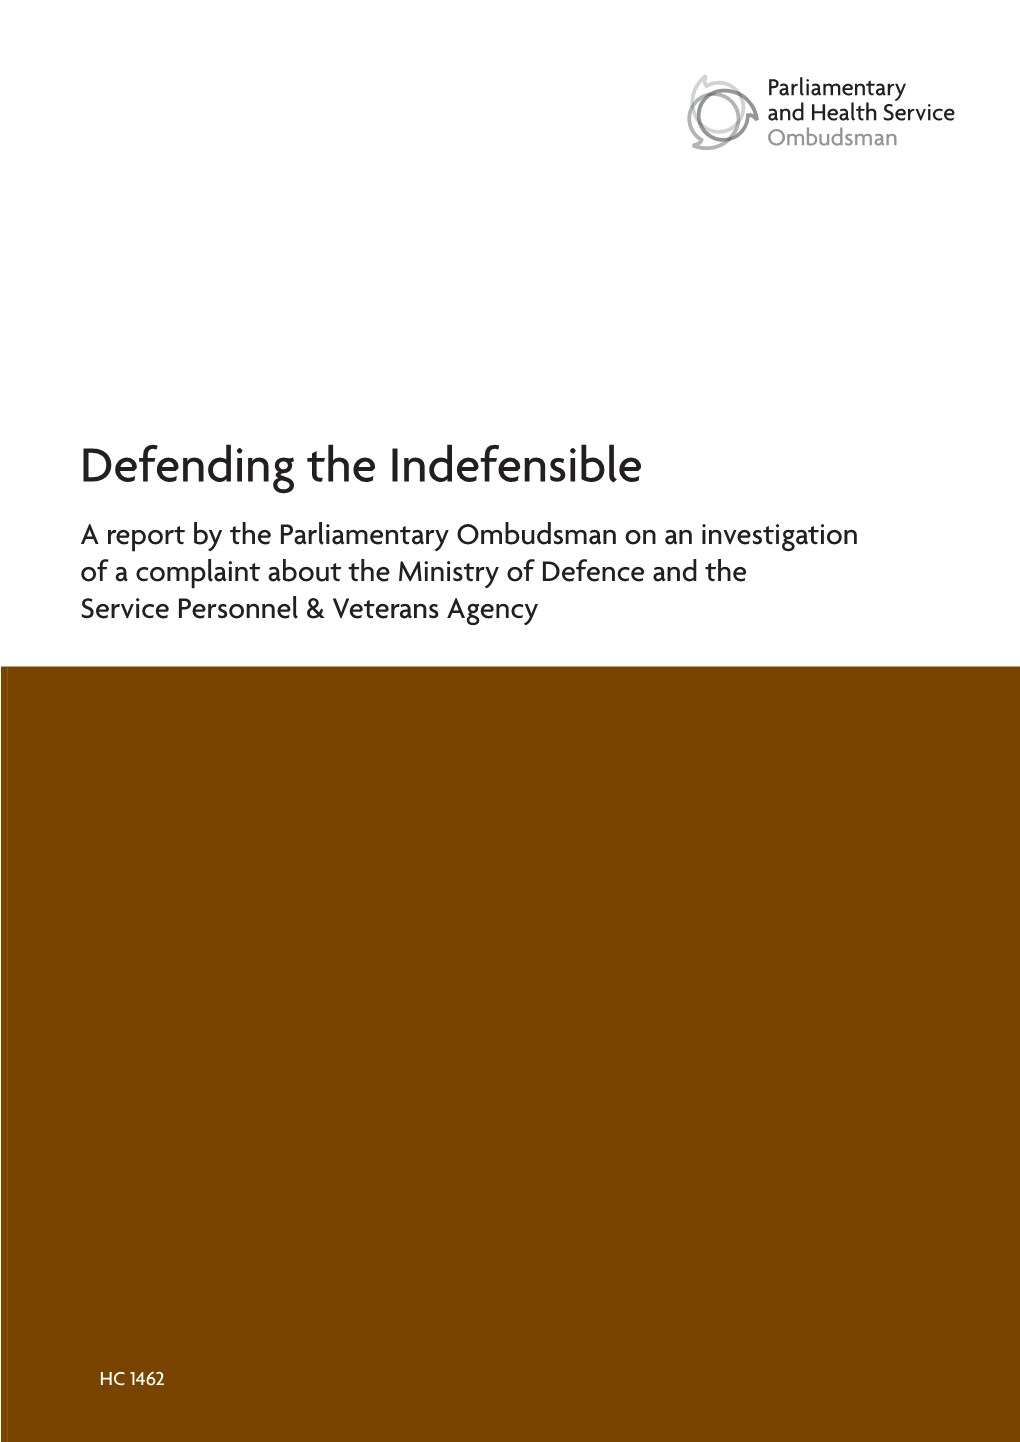 Defending the Indefensible a Report by the Parliamentary Ombudsman On